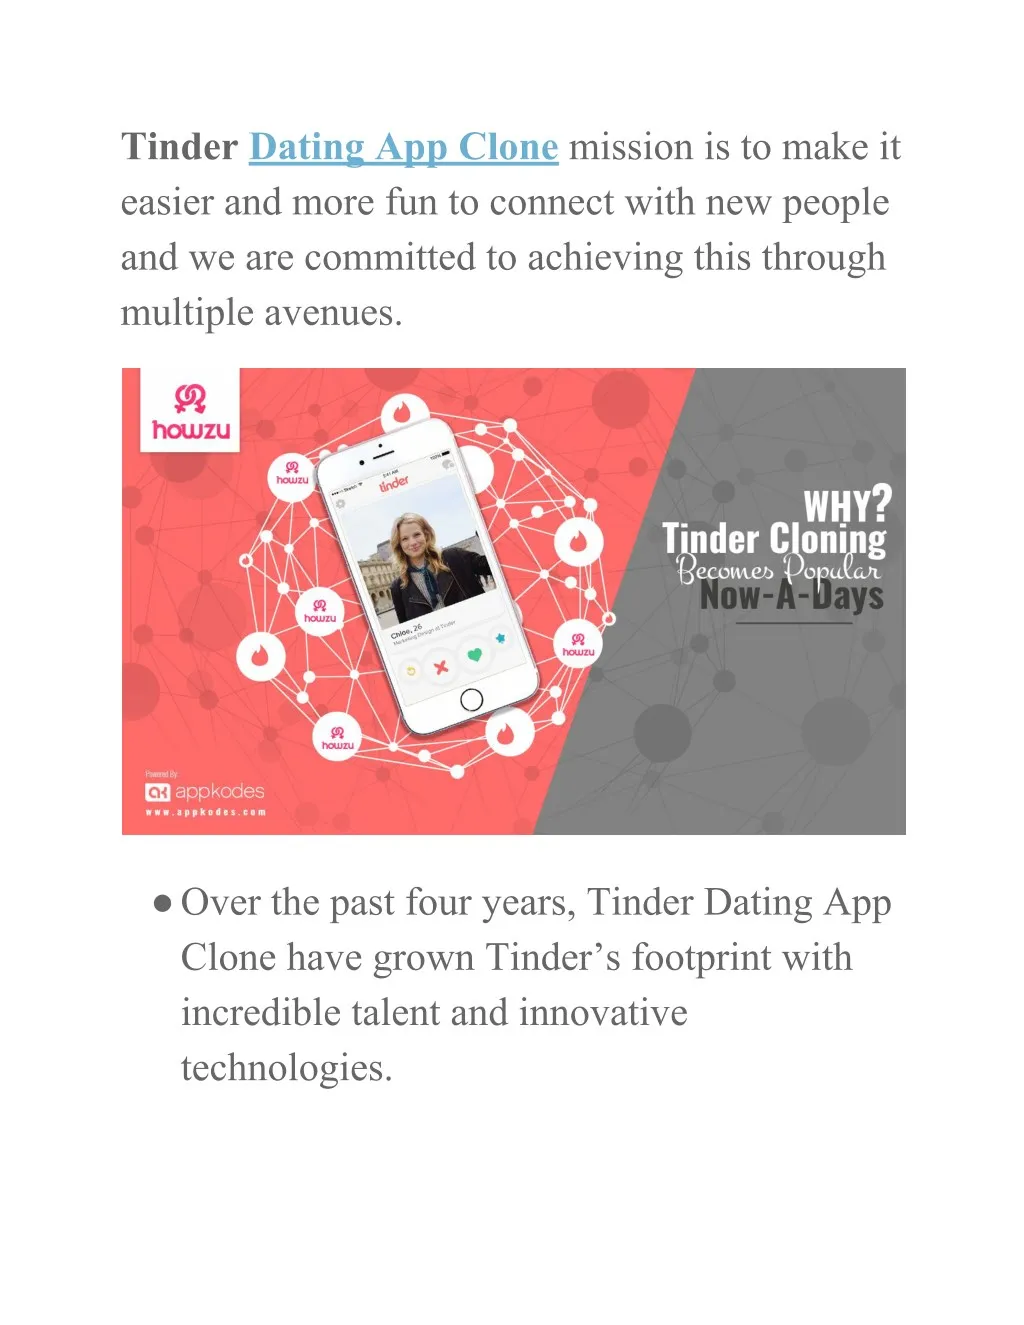 tinder dating app clone mission is to make